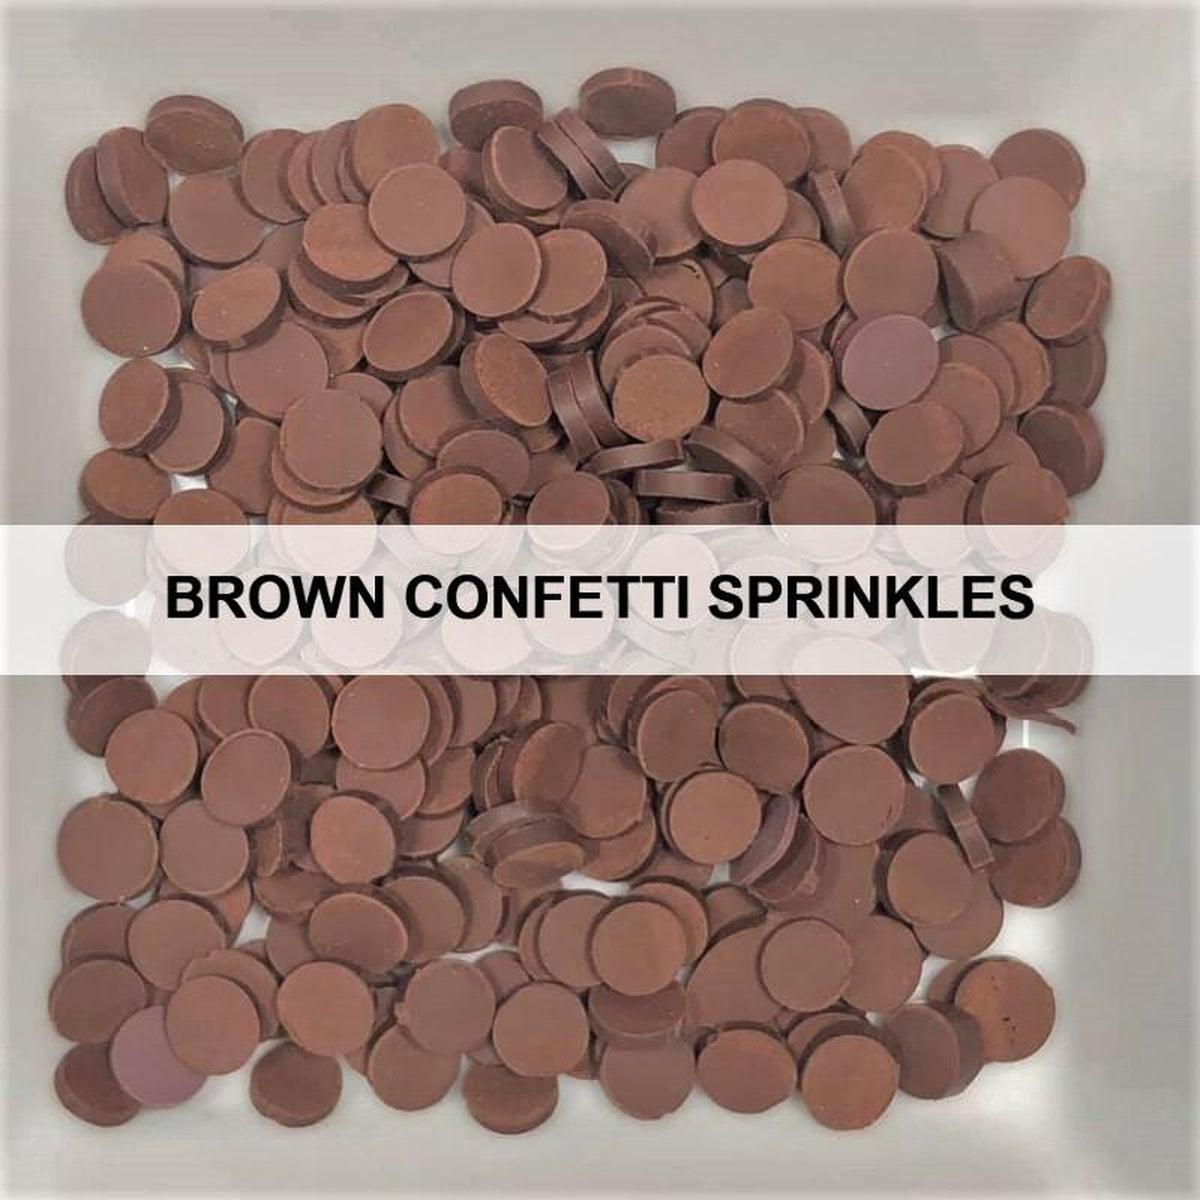 Brown Confetti Sprinkles by Kat Scrappiness - Kat Scrappiness